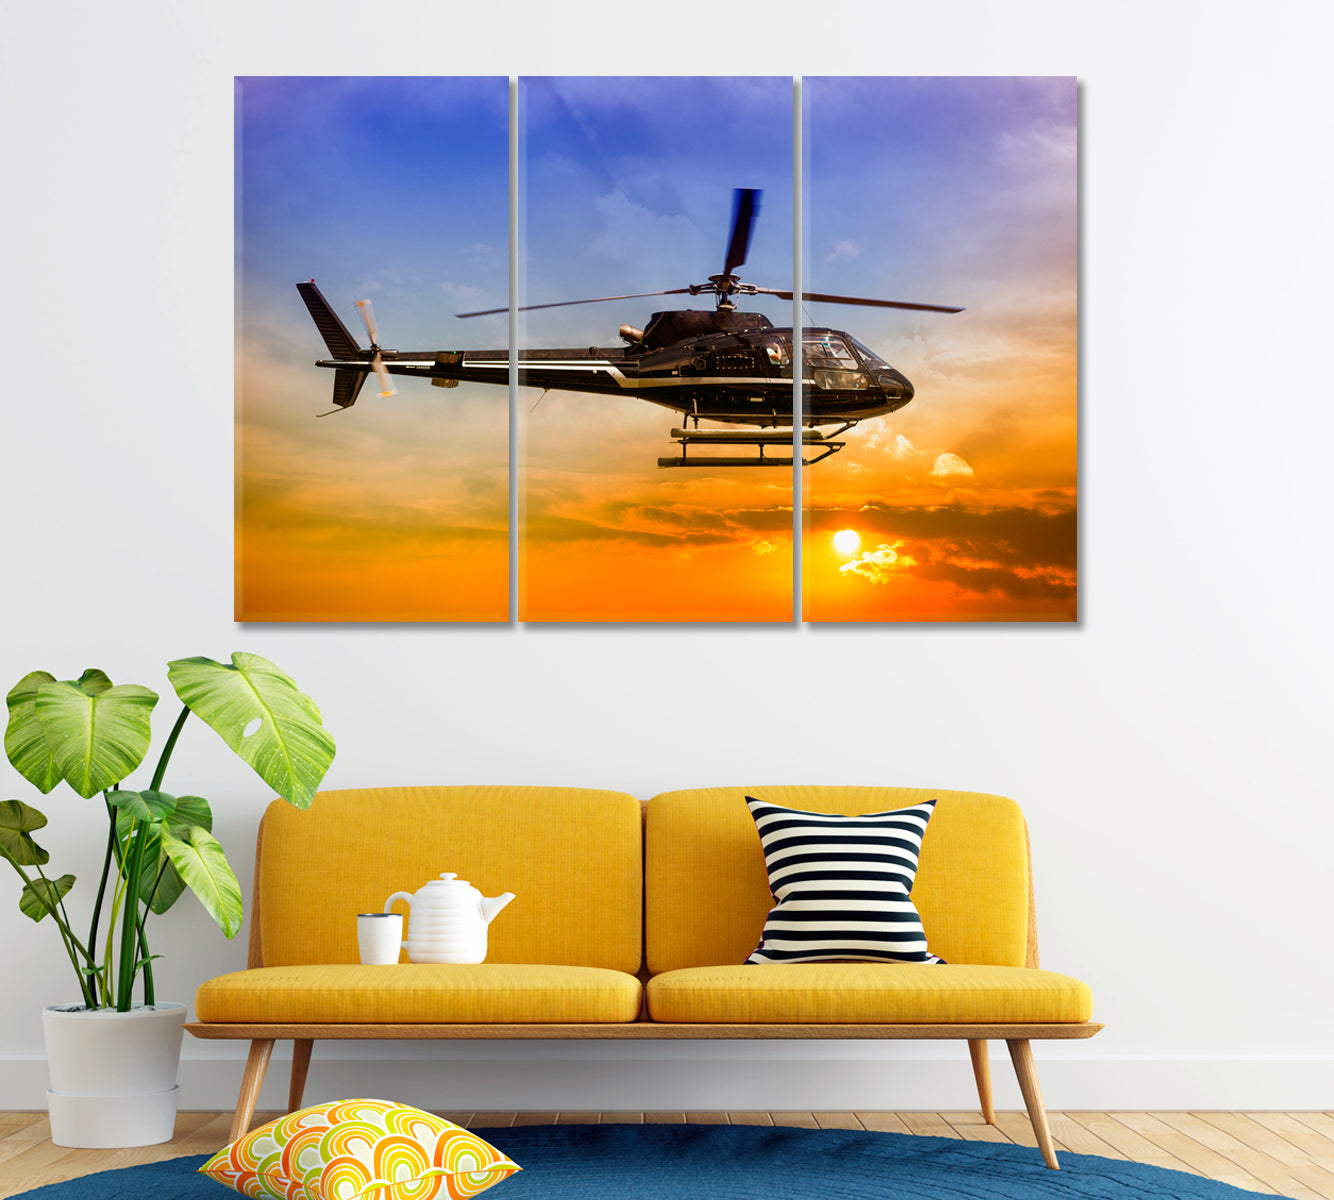 Sightseeing Helicopter Canvas Print ArtLexy 3 Panels 36"x24" inches 